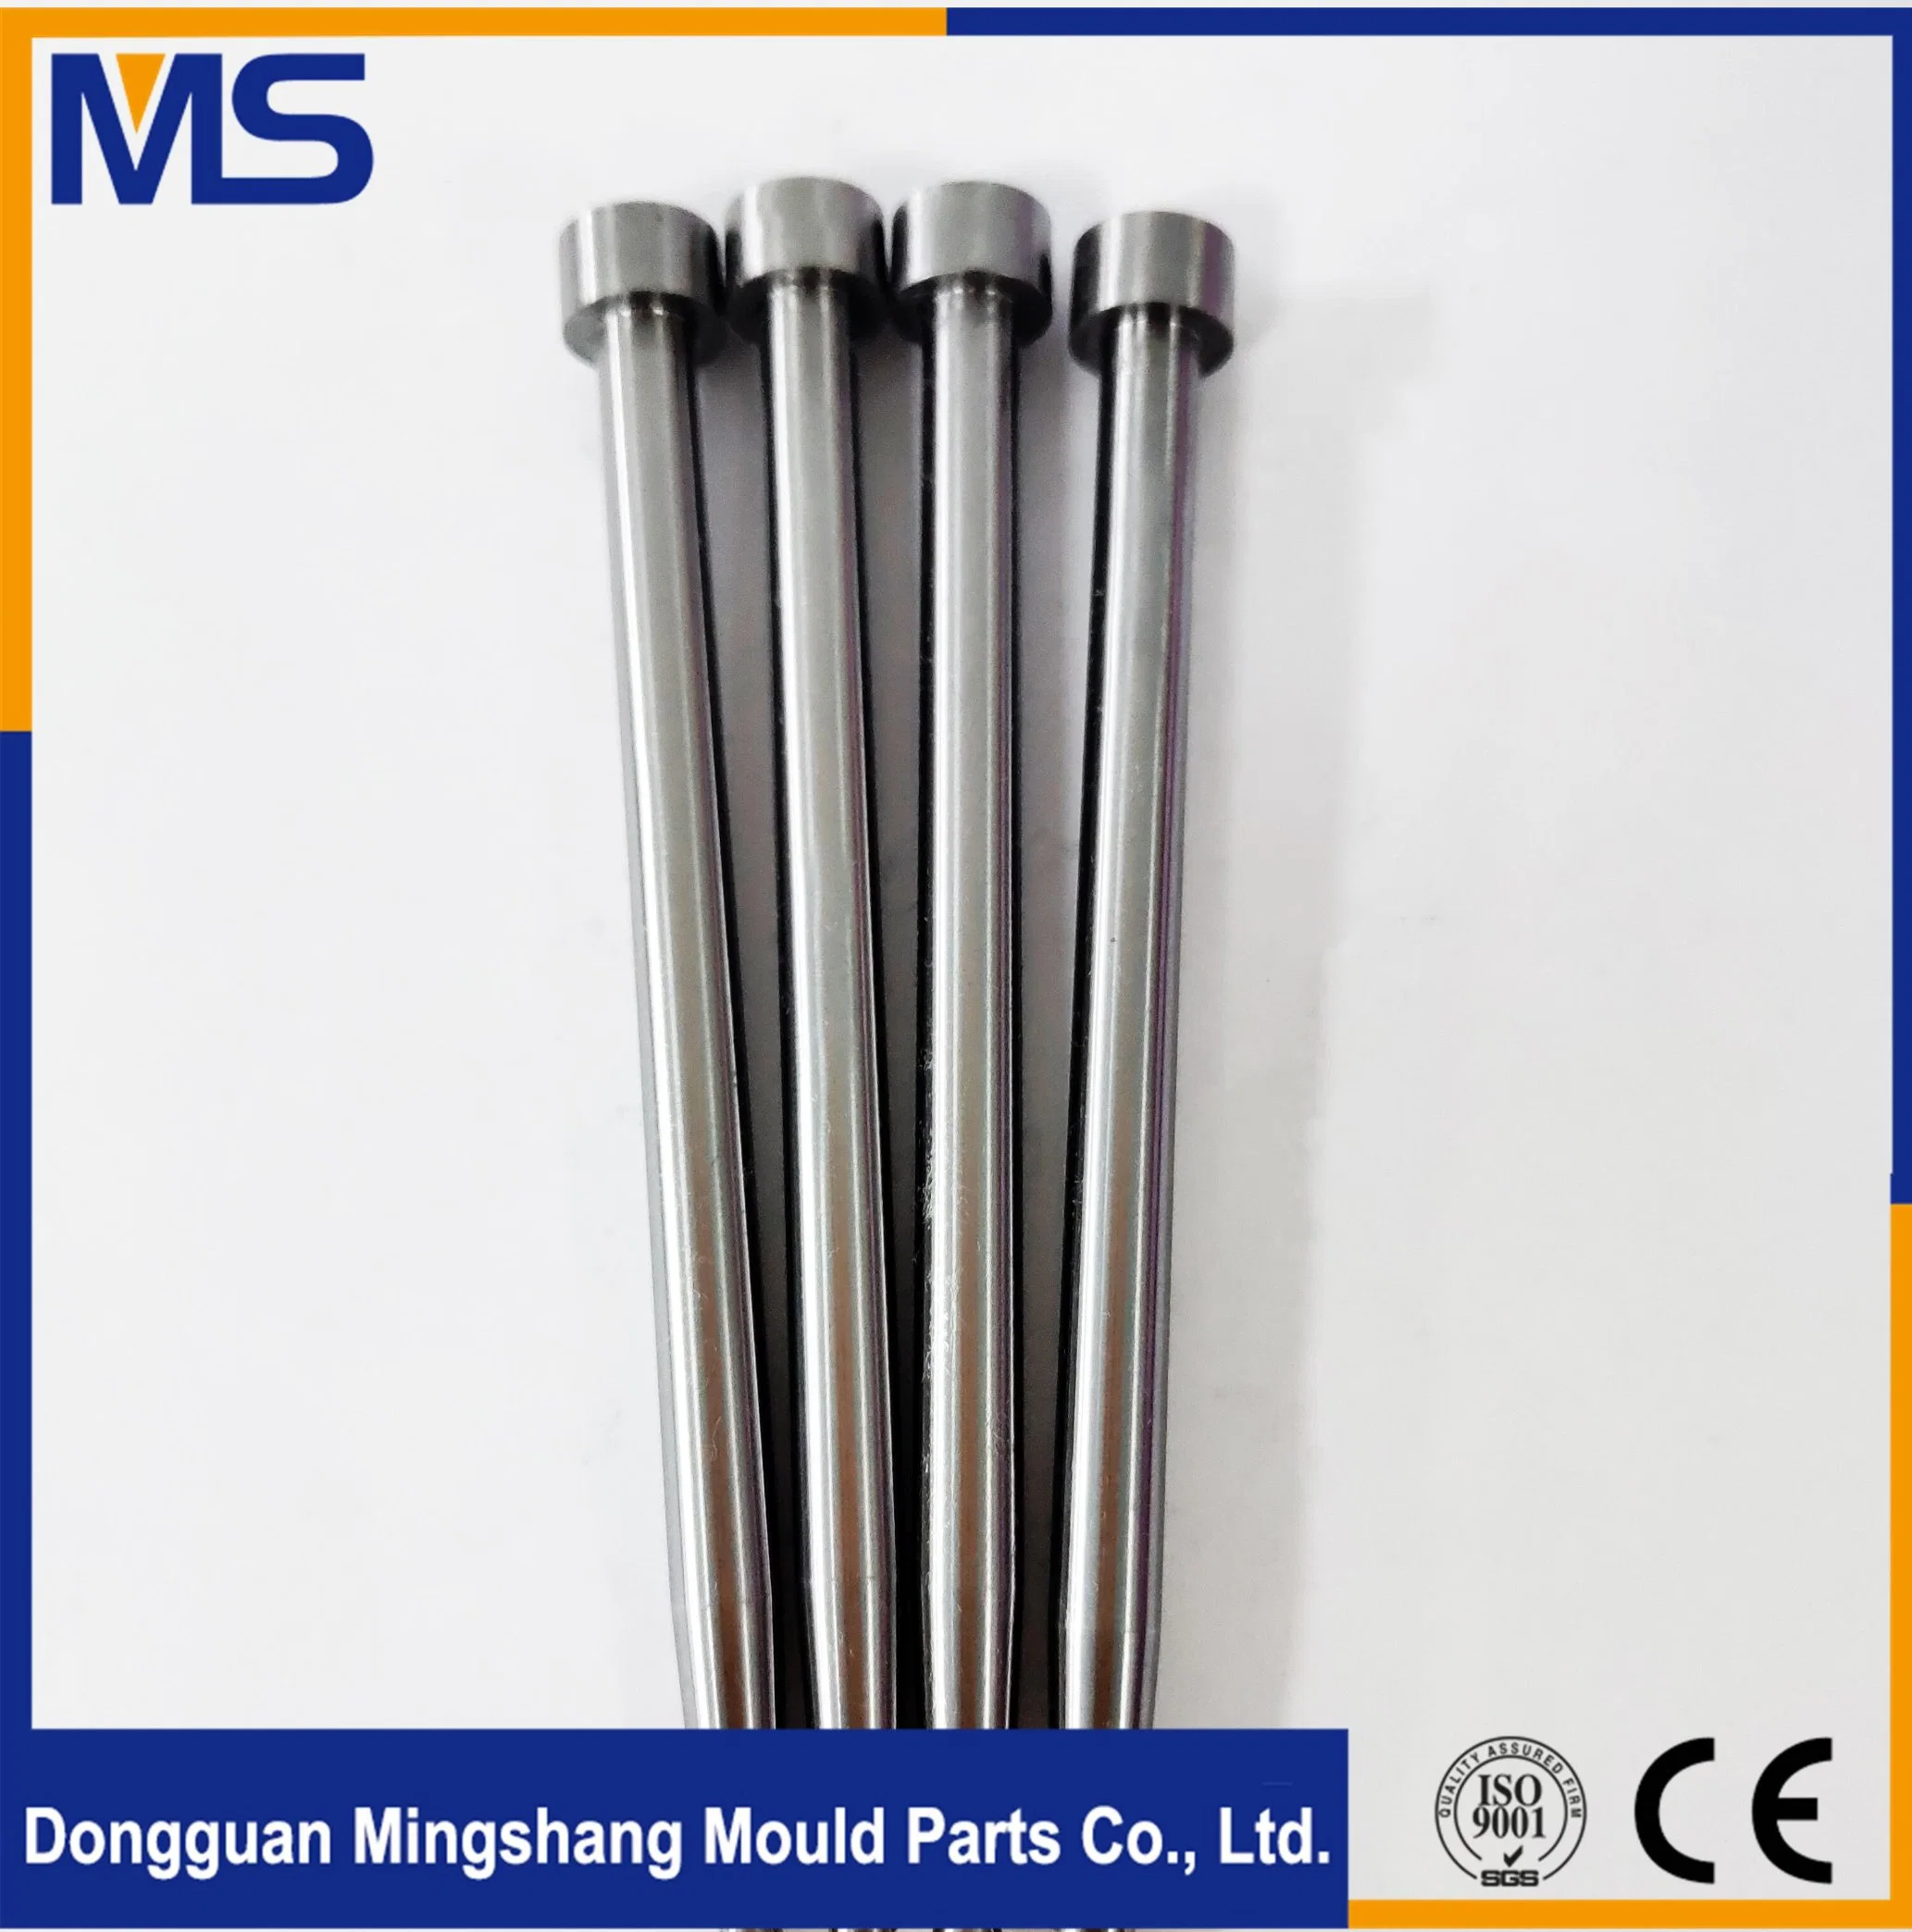 Cylindrical Head Ejector Pins and Sleeves, Precision Ejector Pins Injection Molding Parts